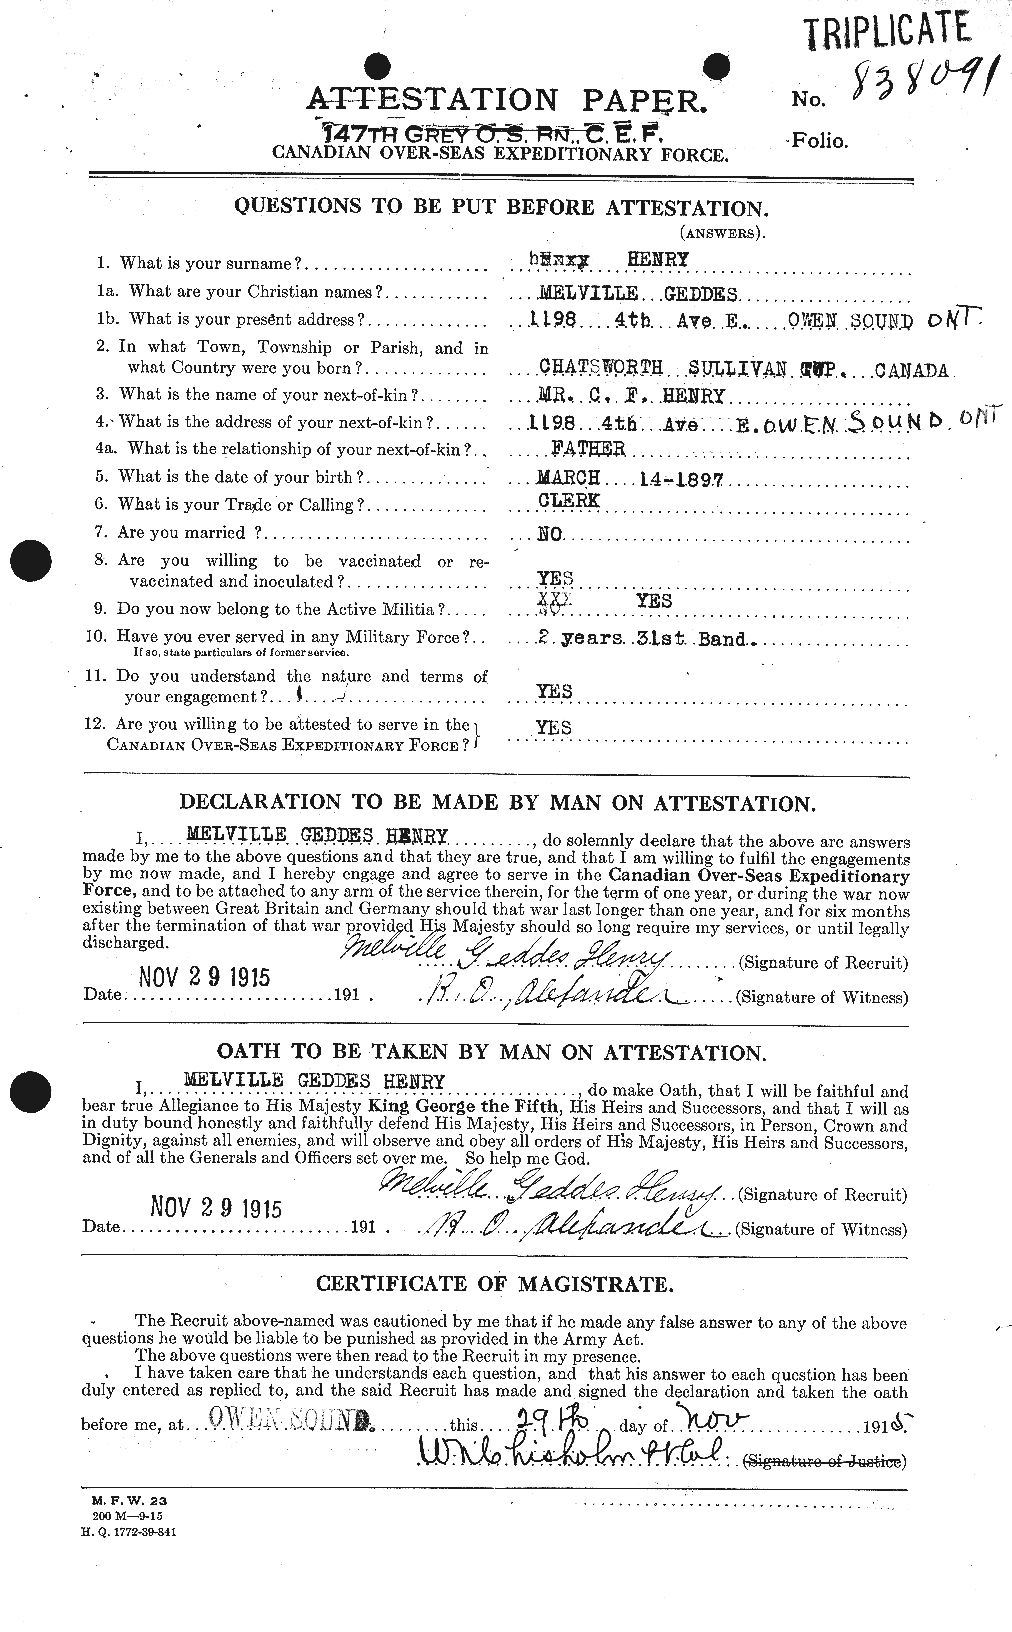 Personnel Records of the First World War - CEF 387665a